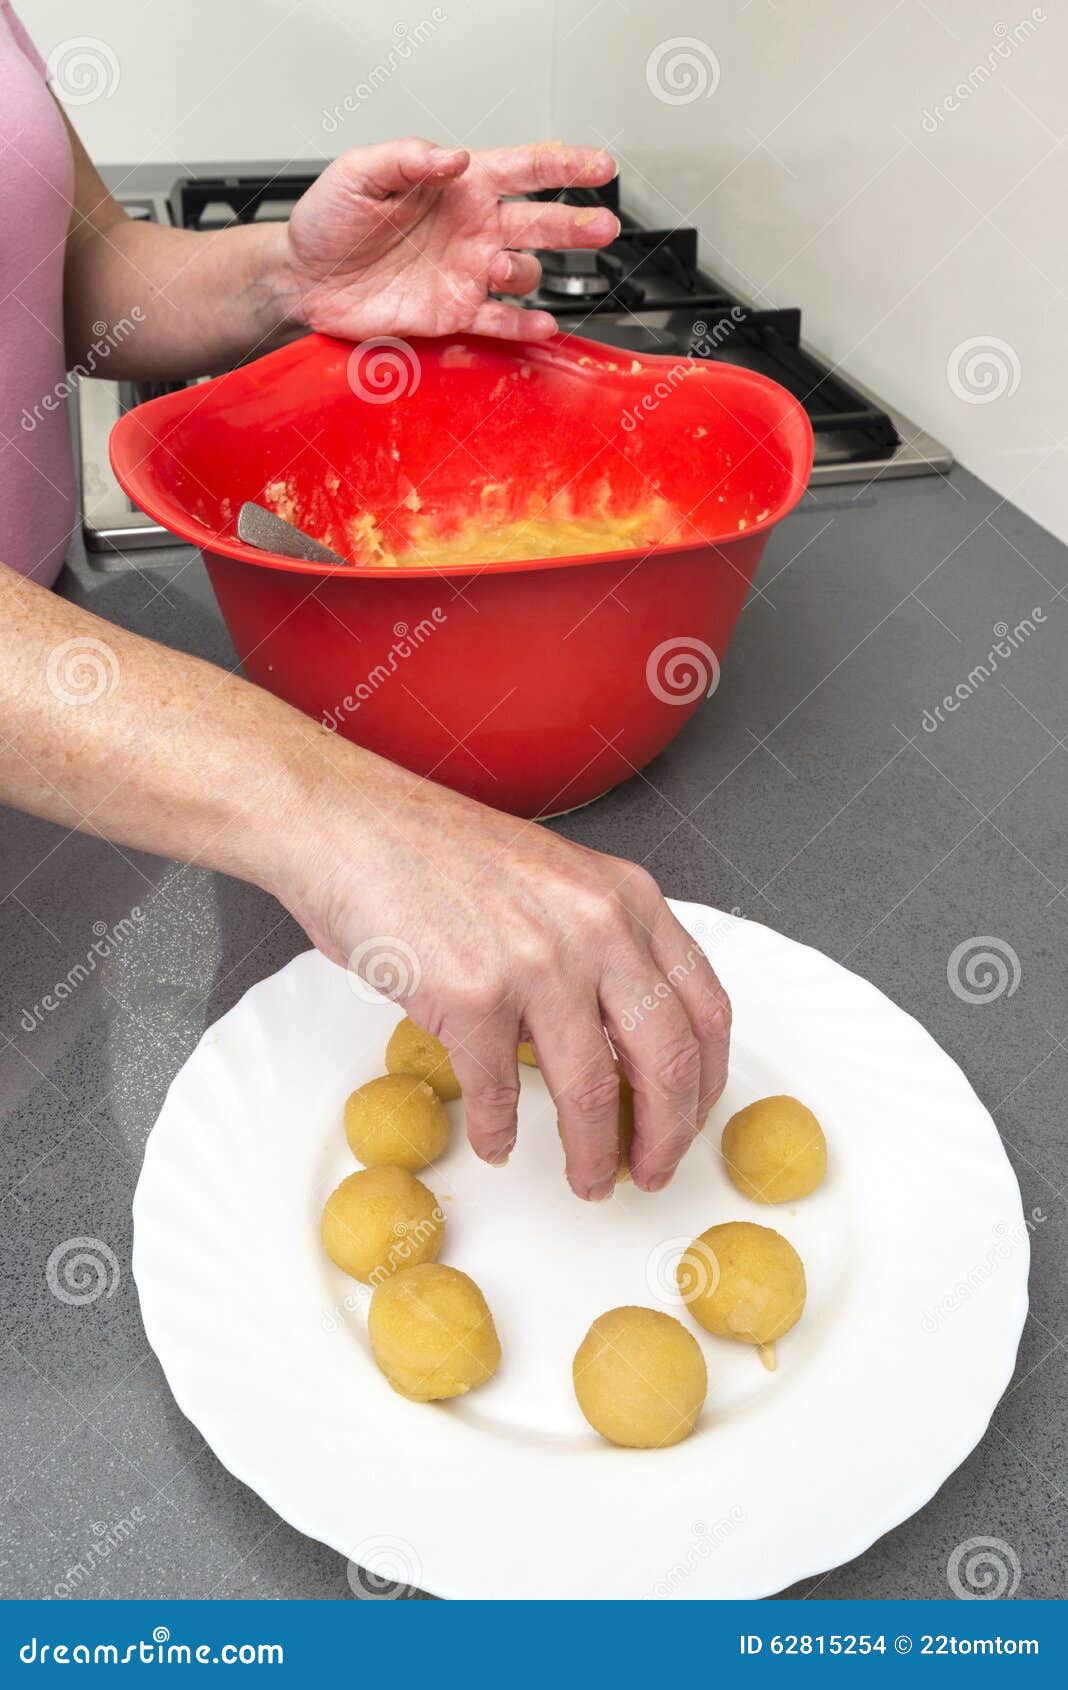 woman preparing sweets in the kitchen